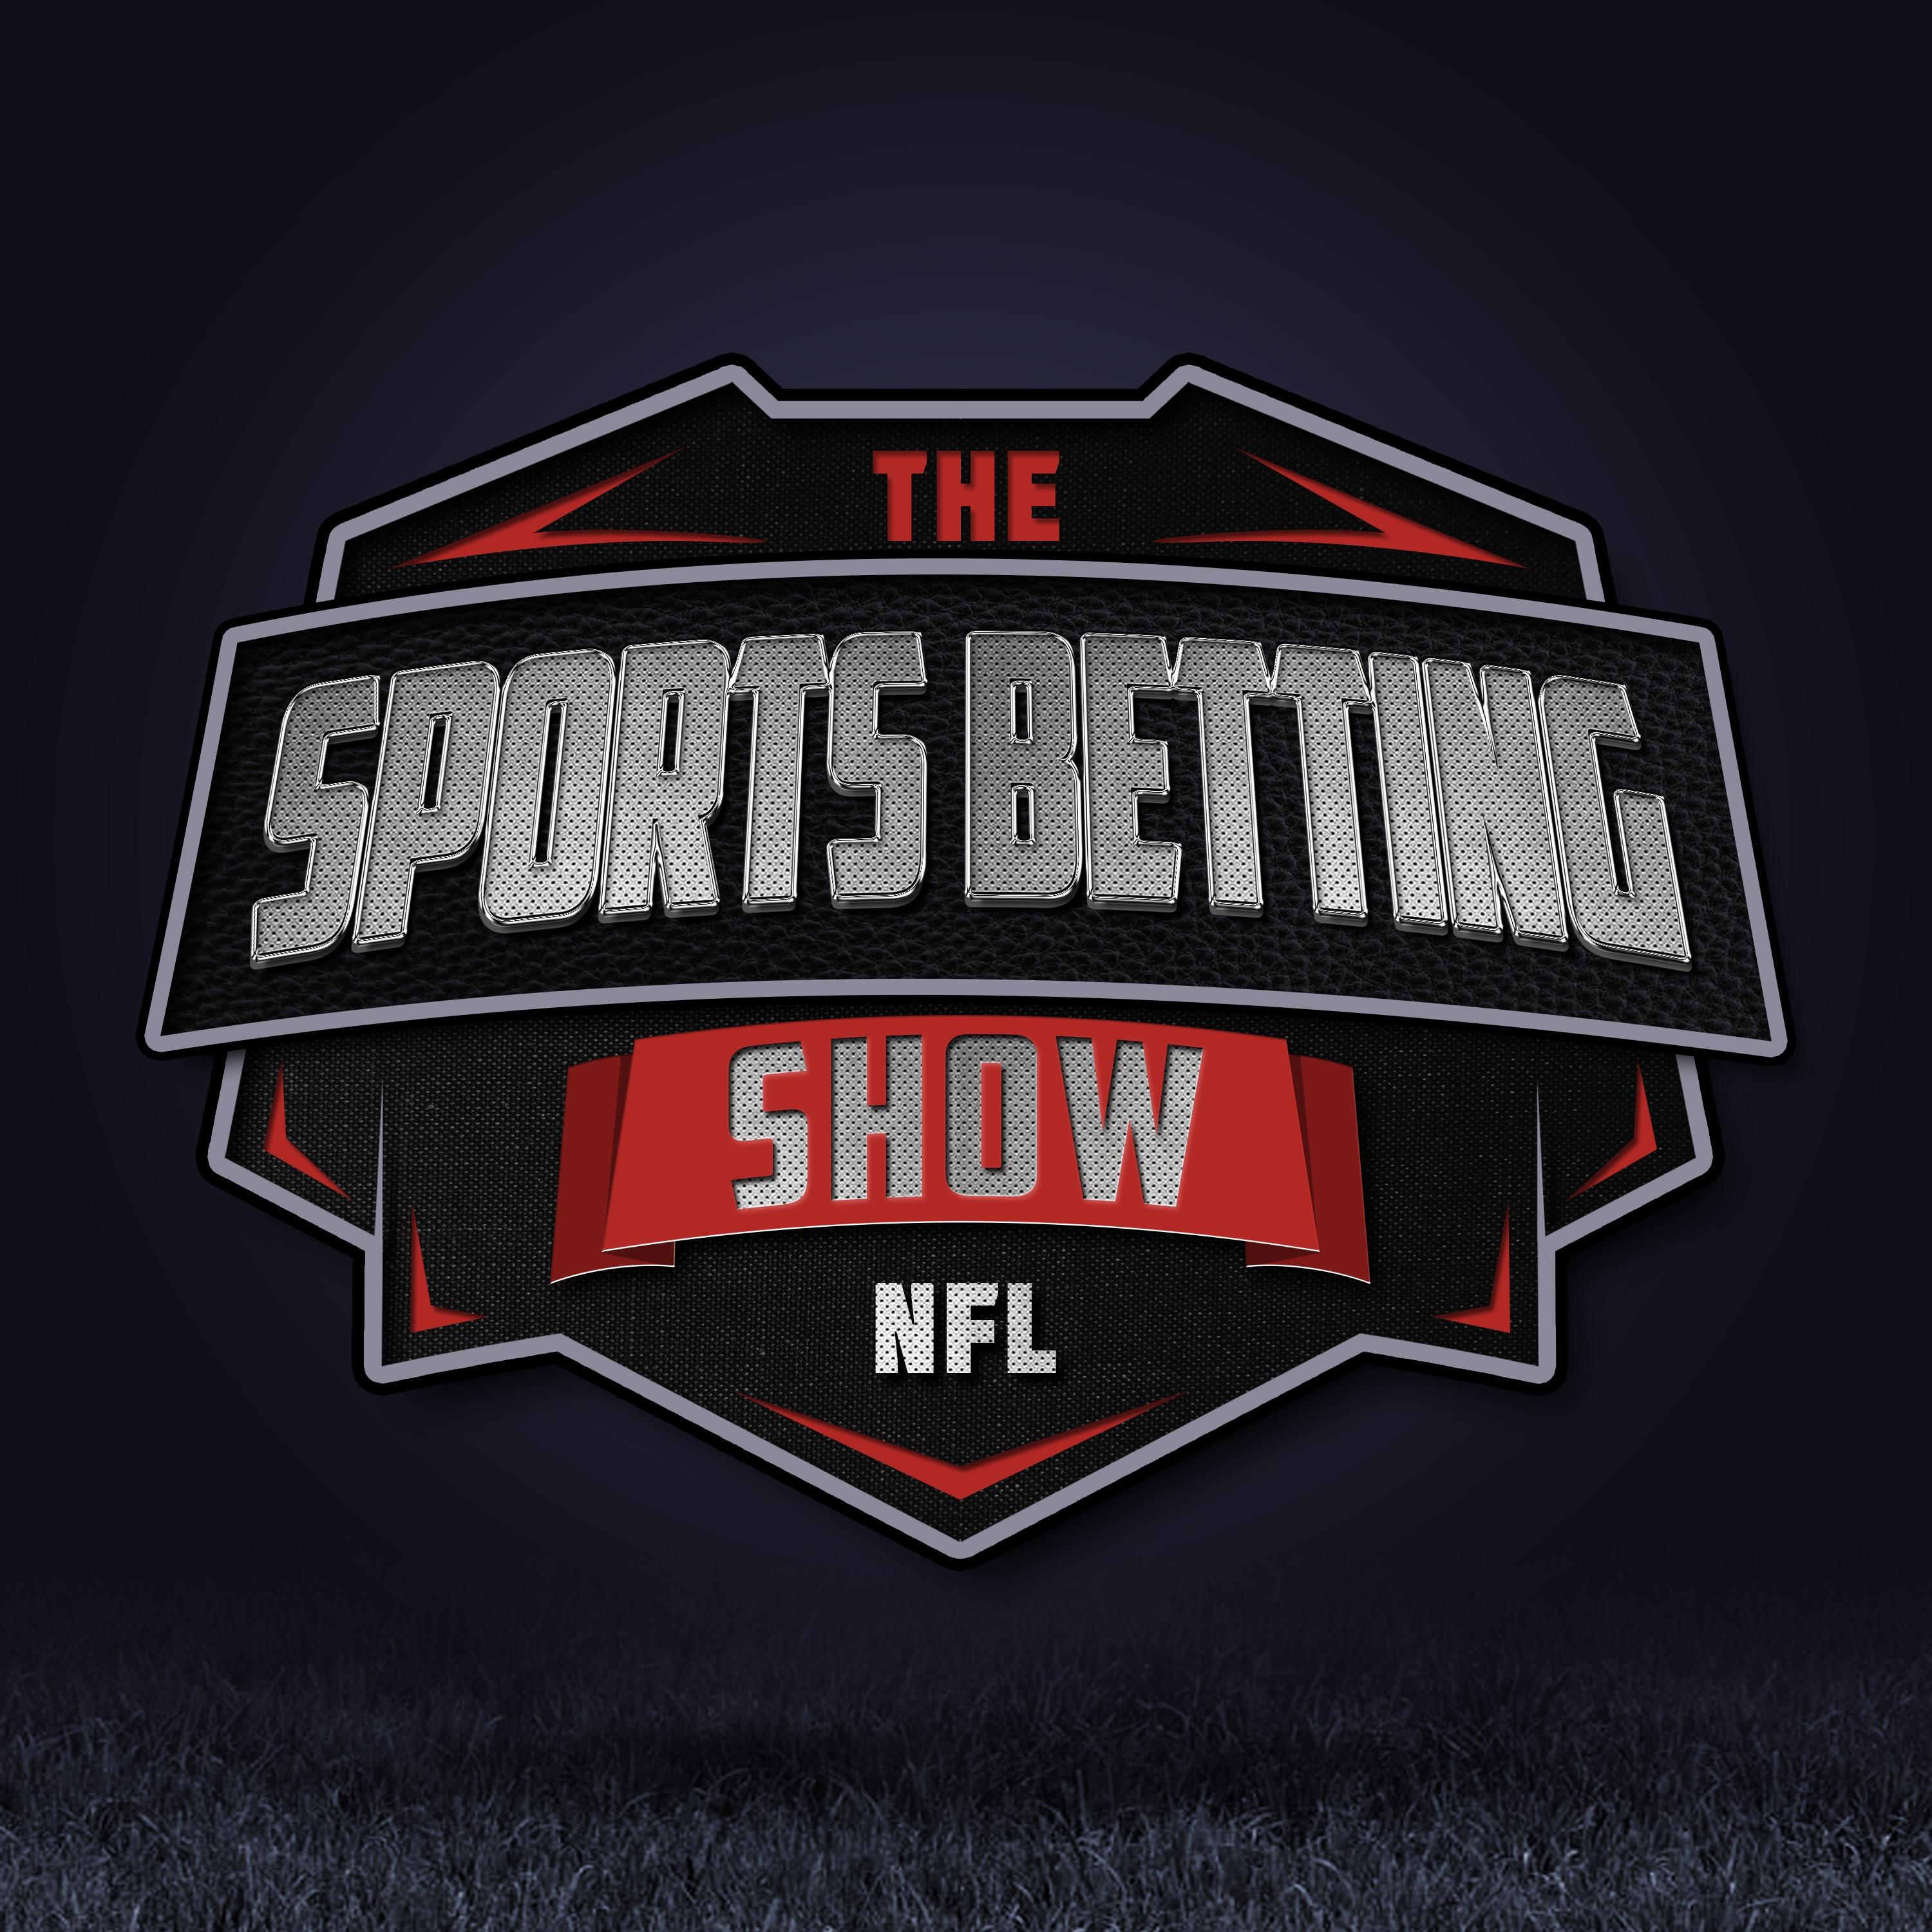 Show poster of The Sports Betting Show NFL